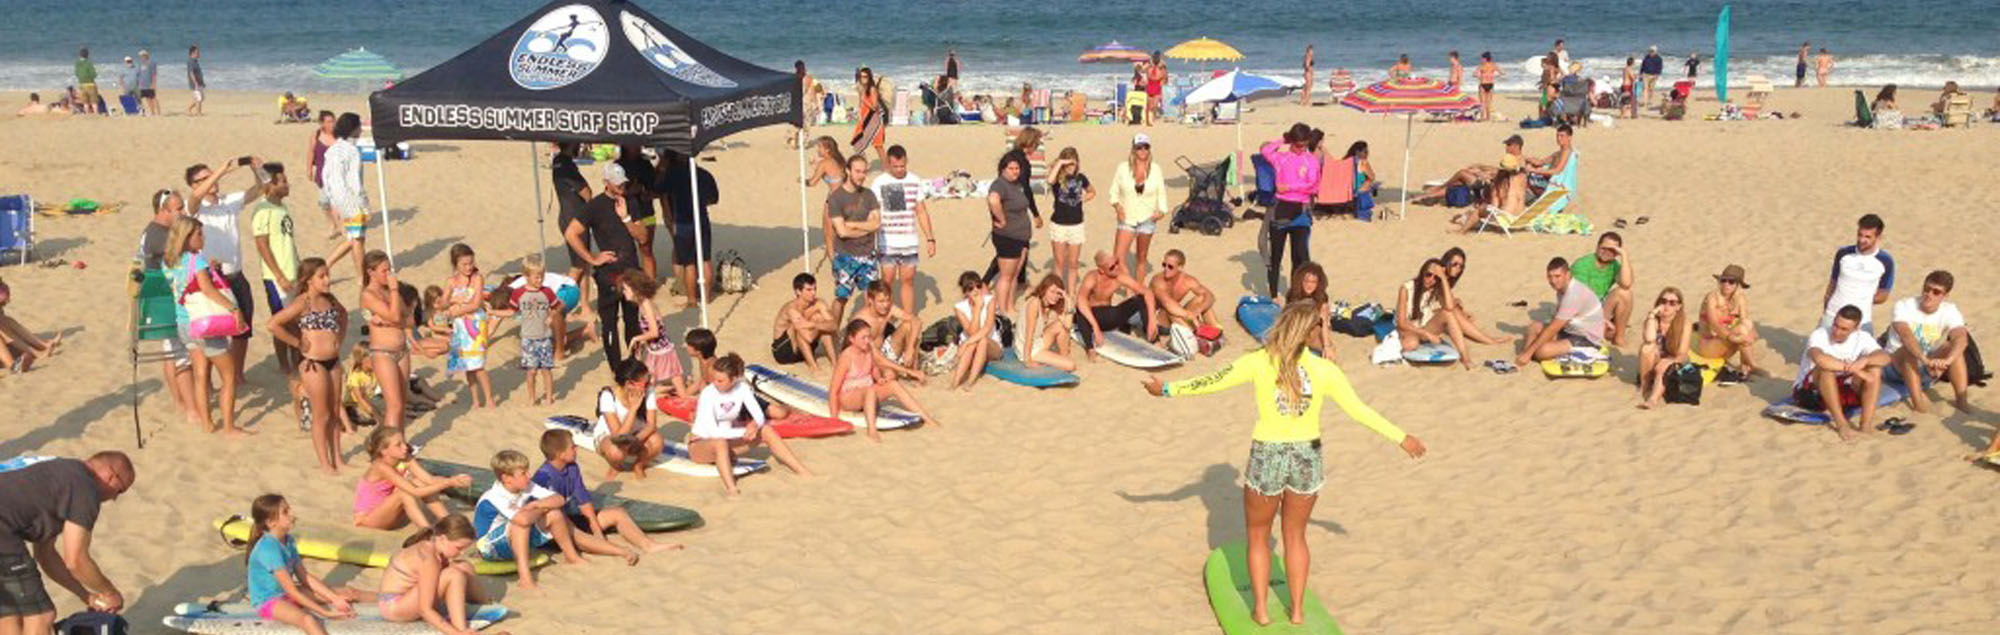 endless summer instructor giving surf lesson to crowd of kids